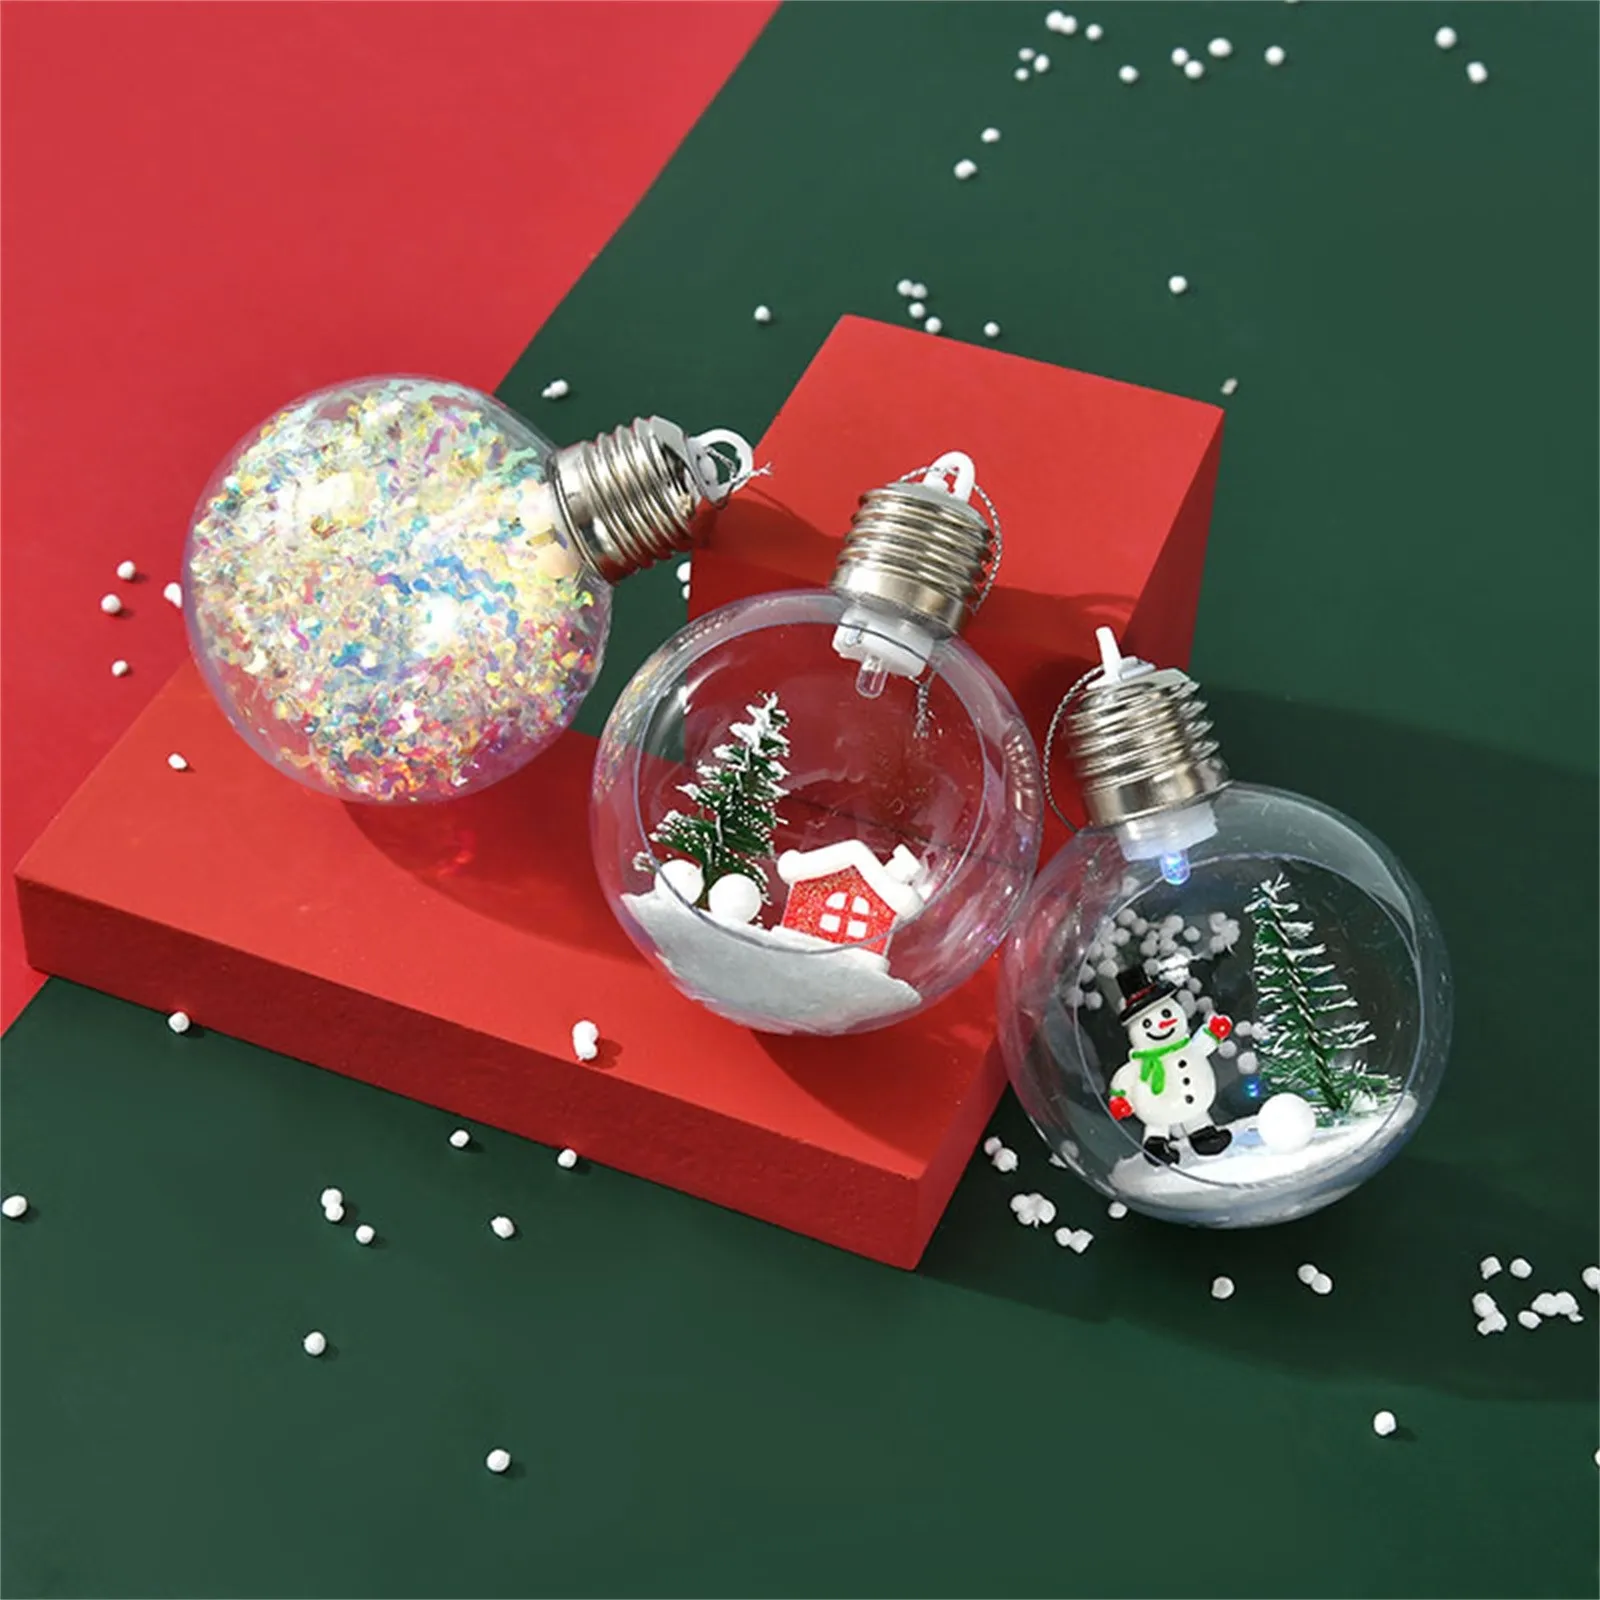 M01443 MOREZMORE 20mm Acrylic Ball Sphere Clear 2 Part Open Hanging Ornament 